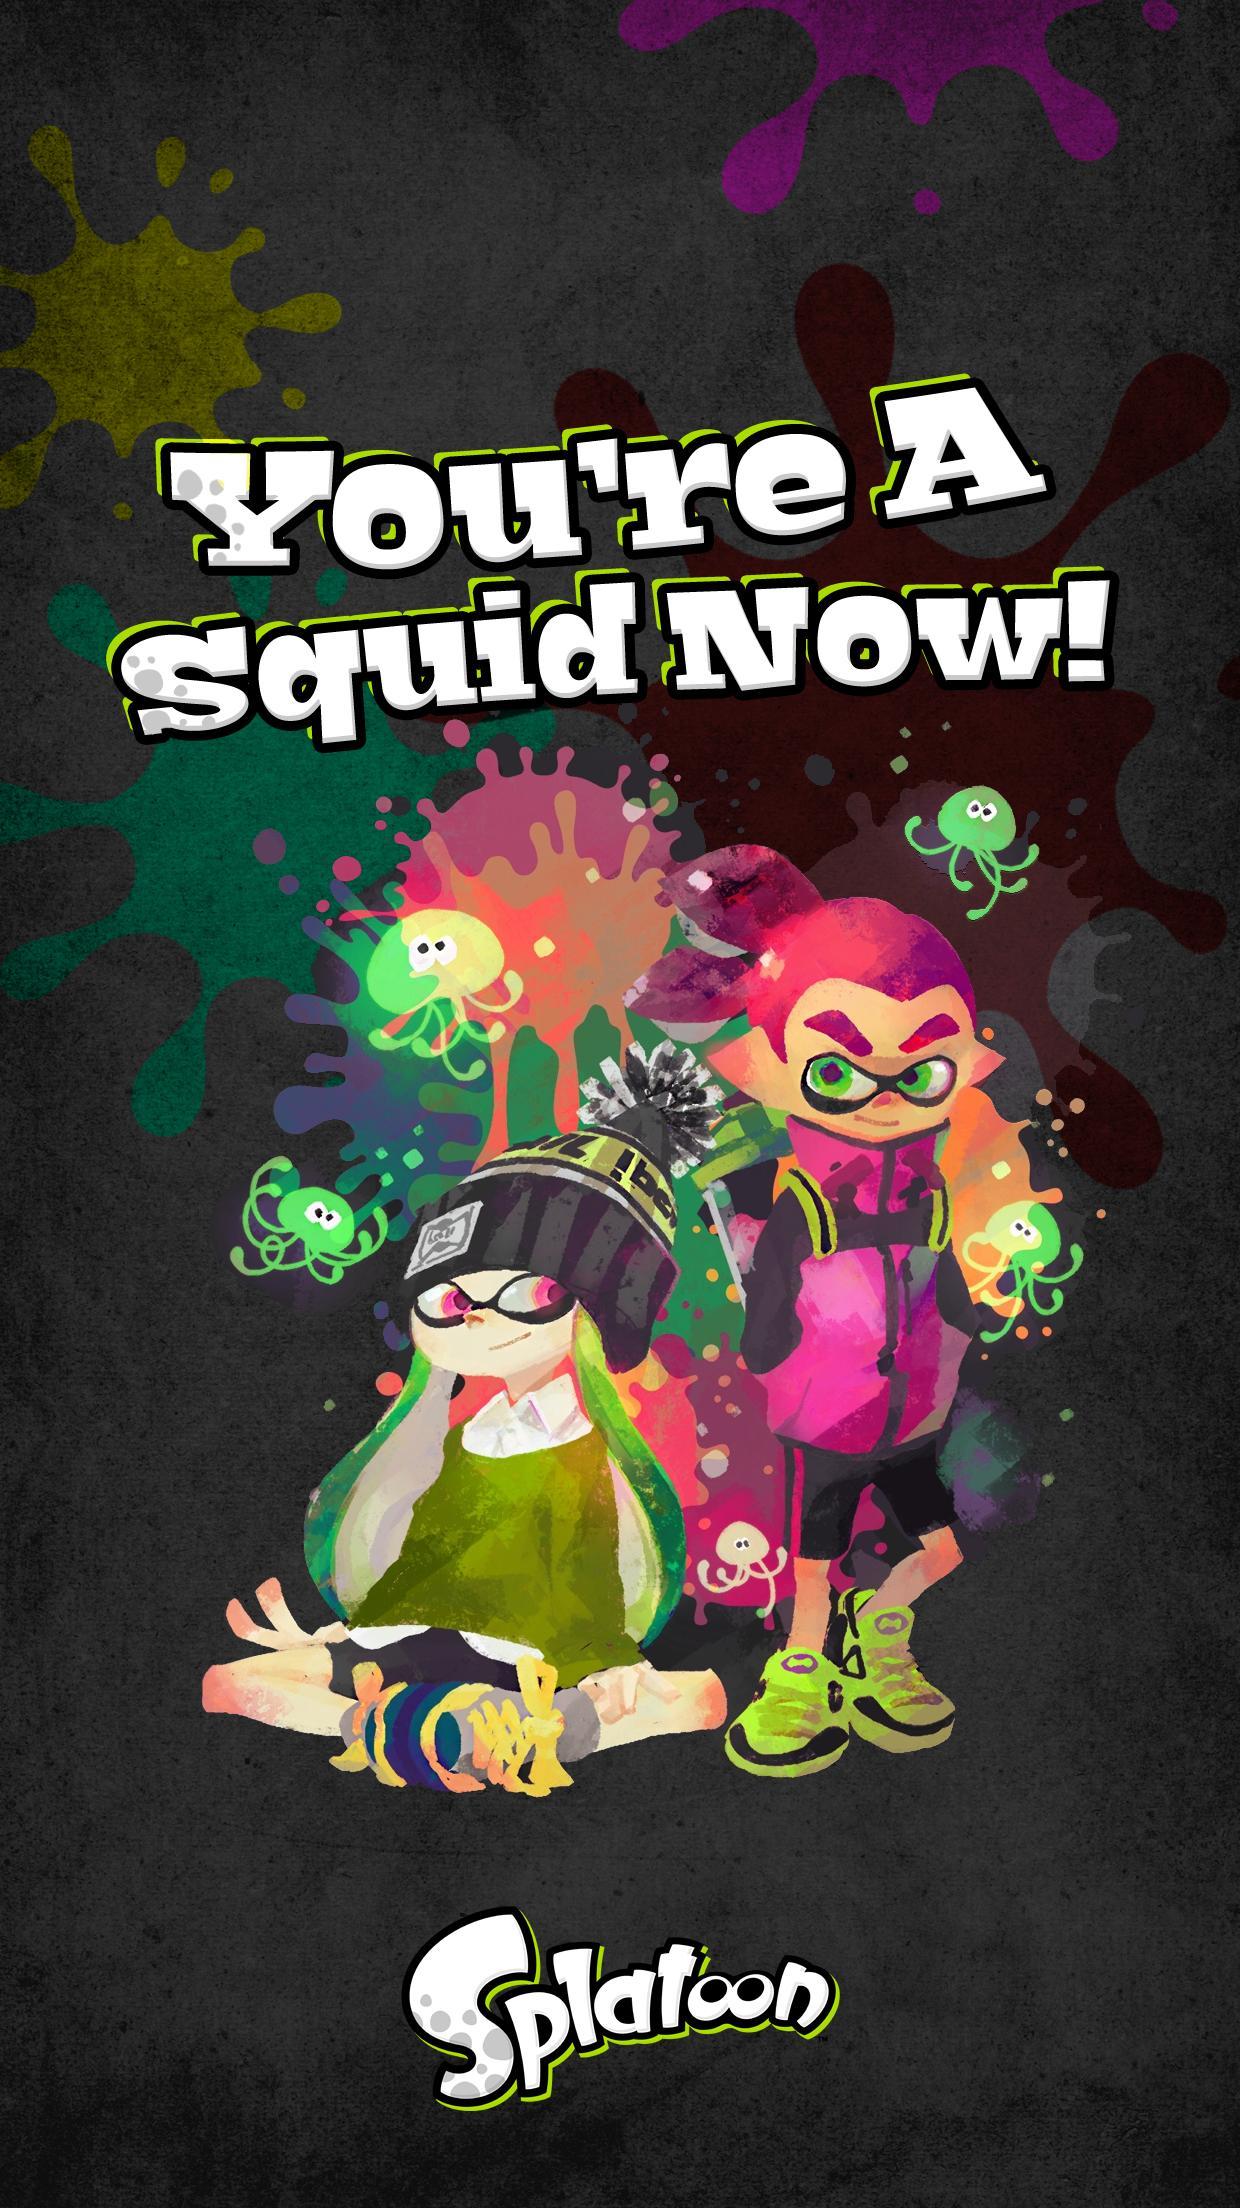 When you can't find Splatoon smartphone wallpaper, make your own